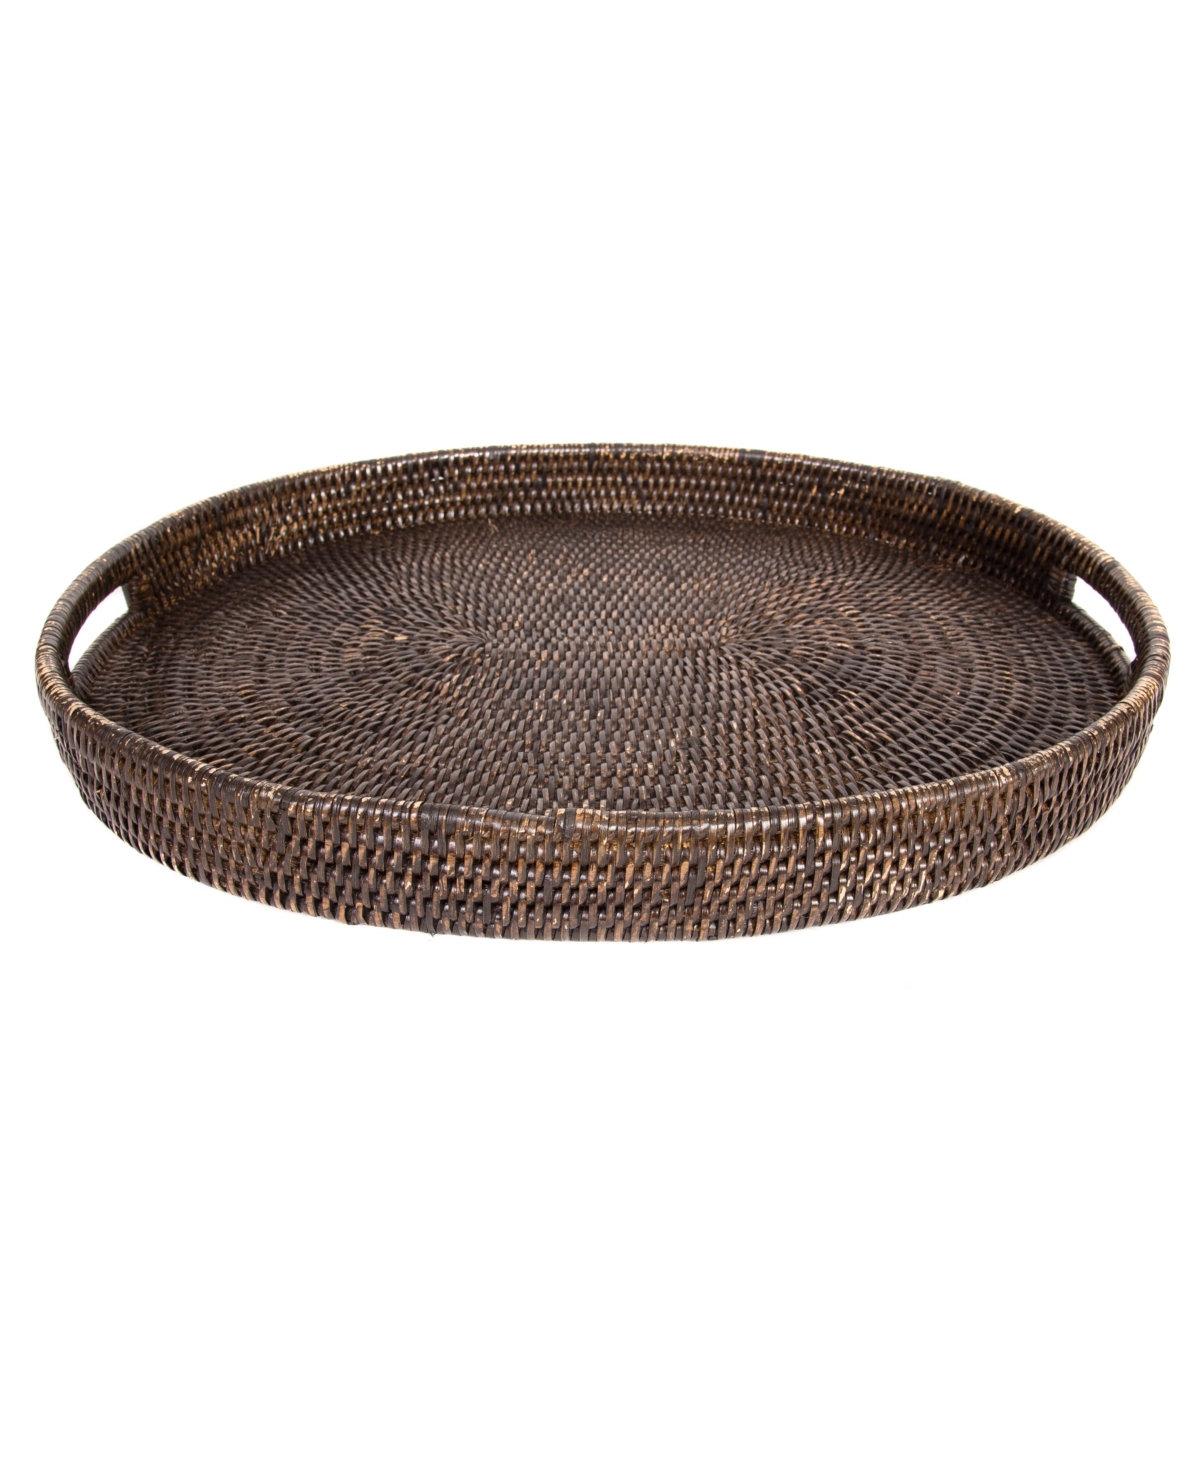 Artifacts Trading Company Artifacts Rattan Oval Tray With Cutout Handles In Coffee Bean